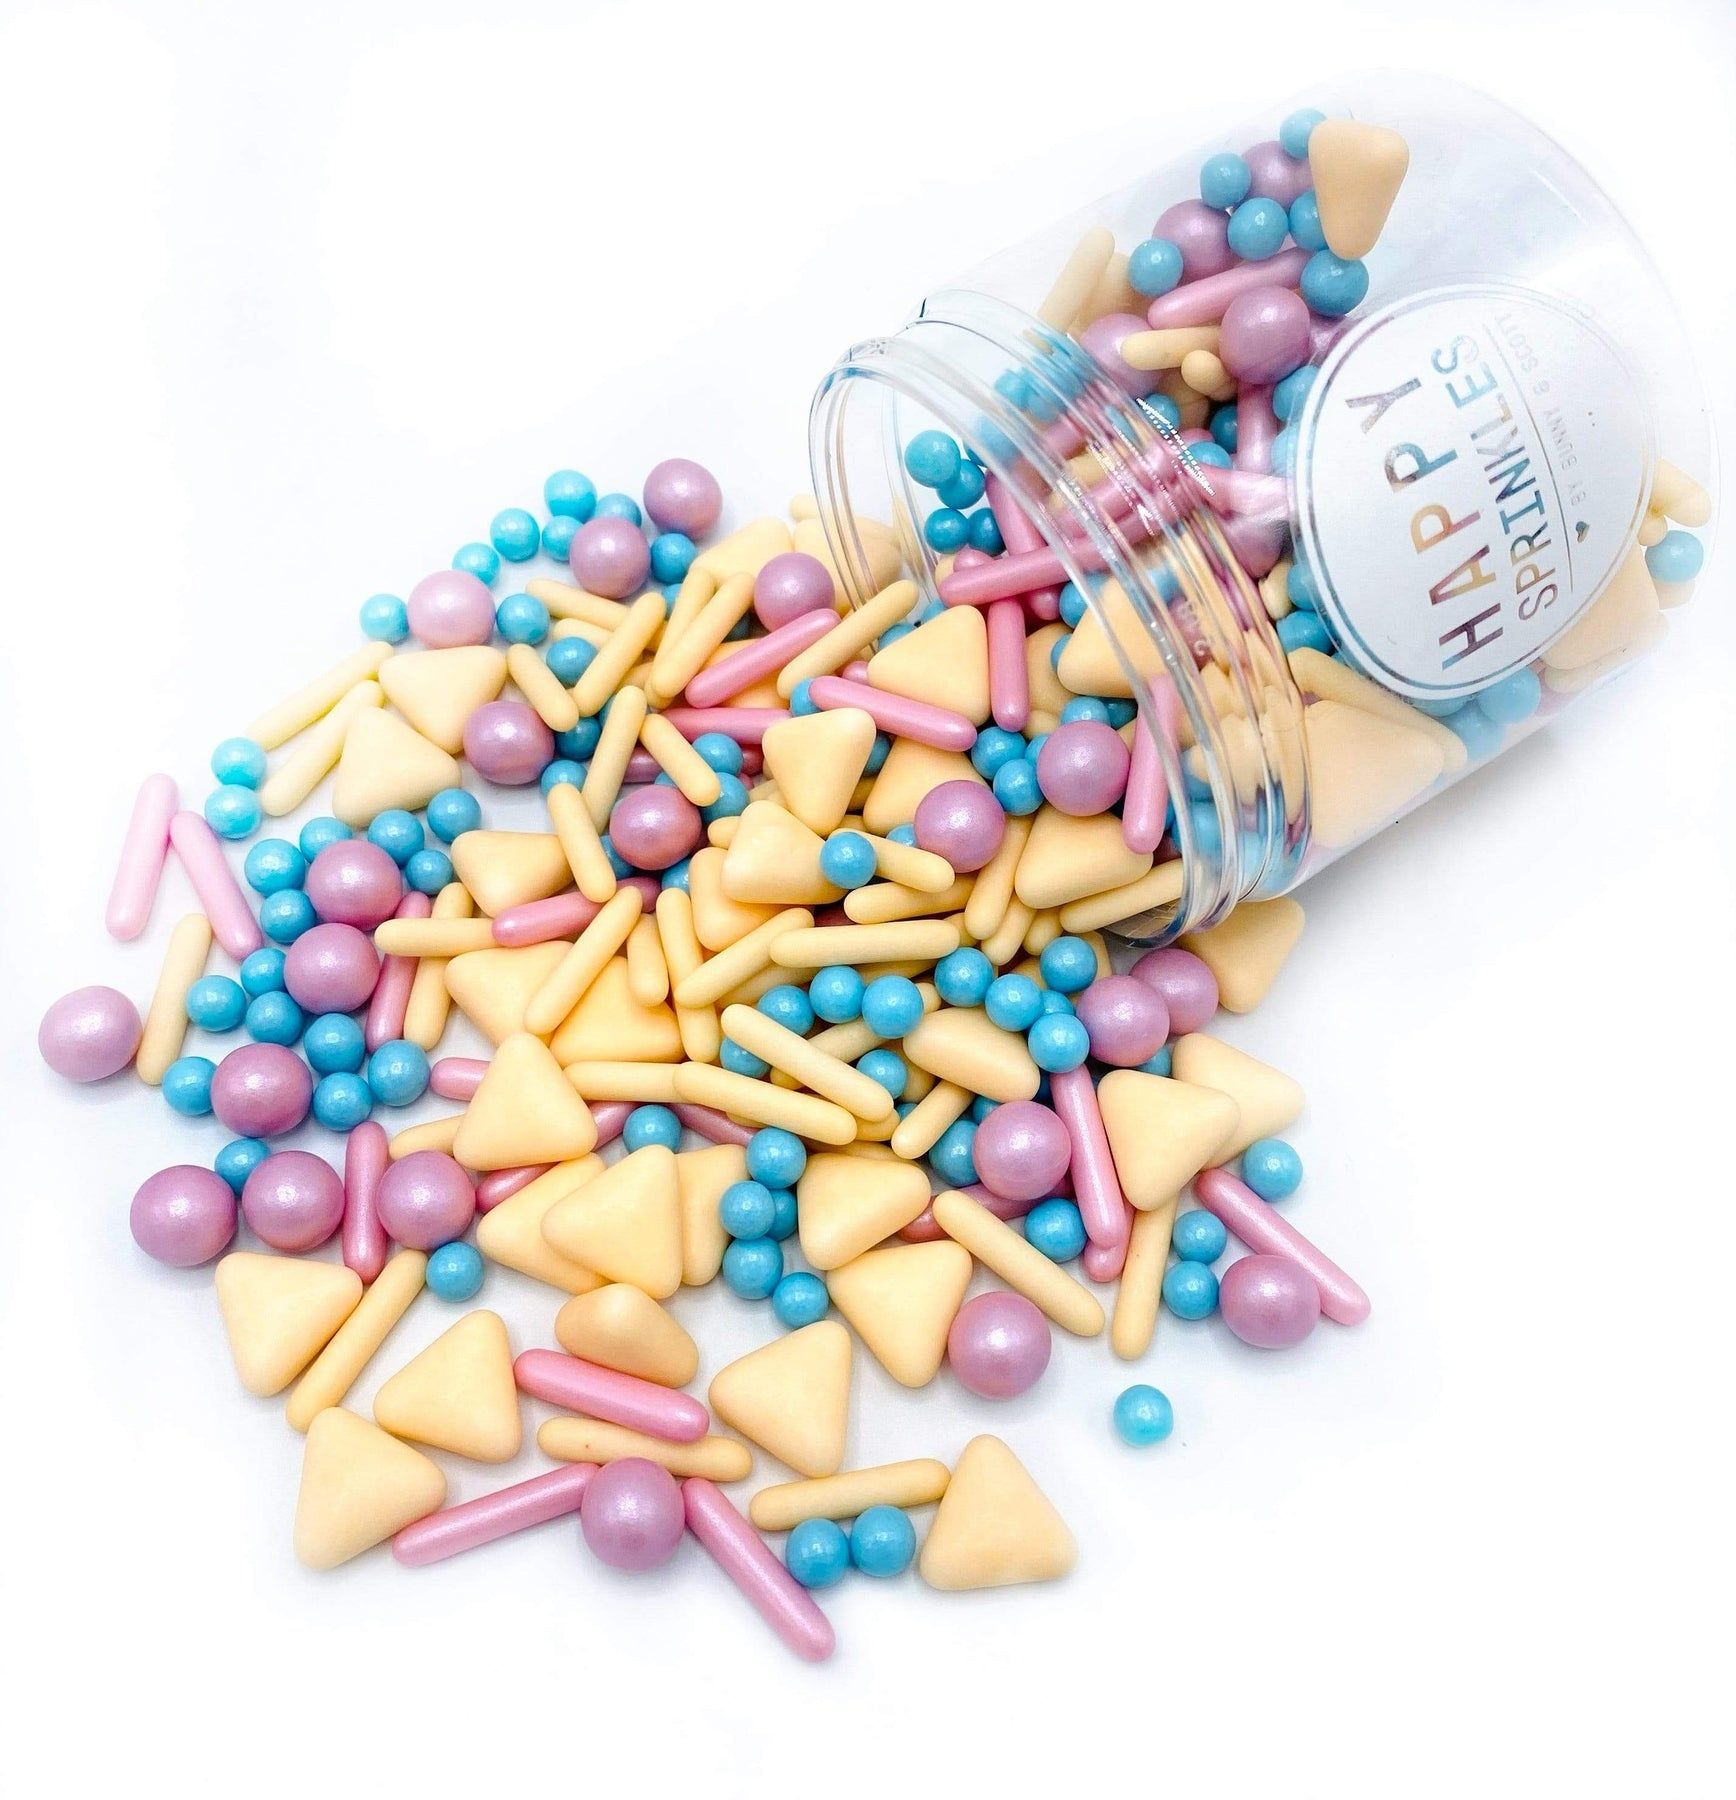 Happy Sprinkles Candy Crush-190gr-